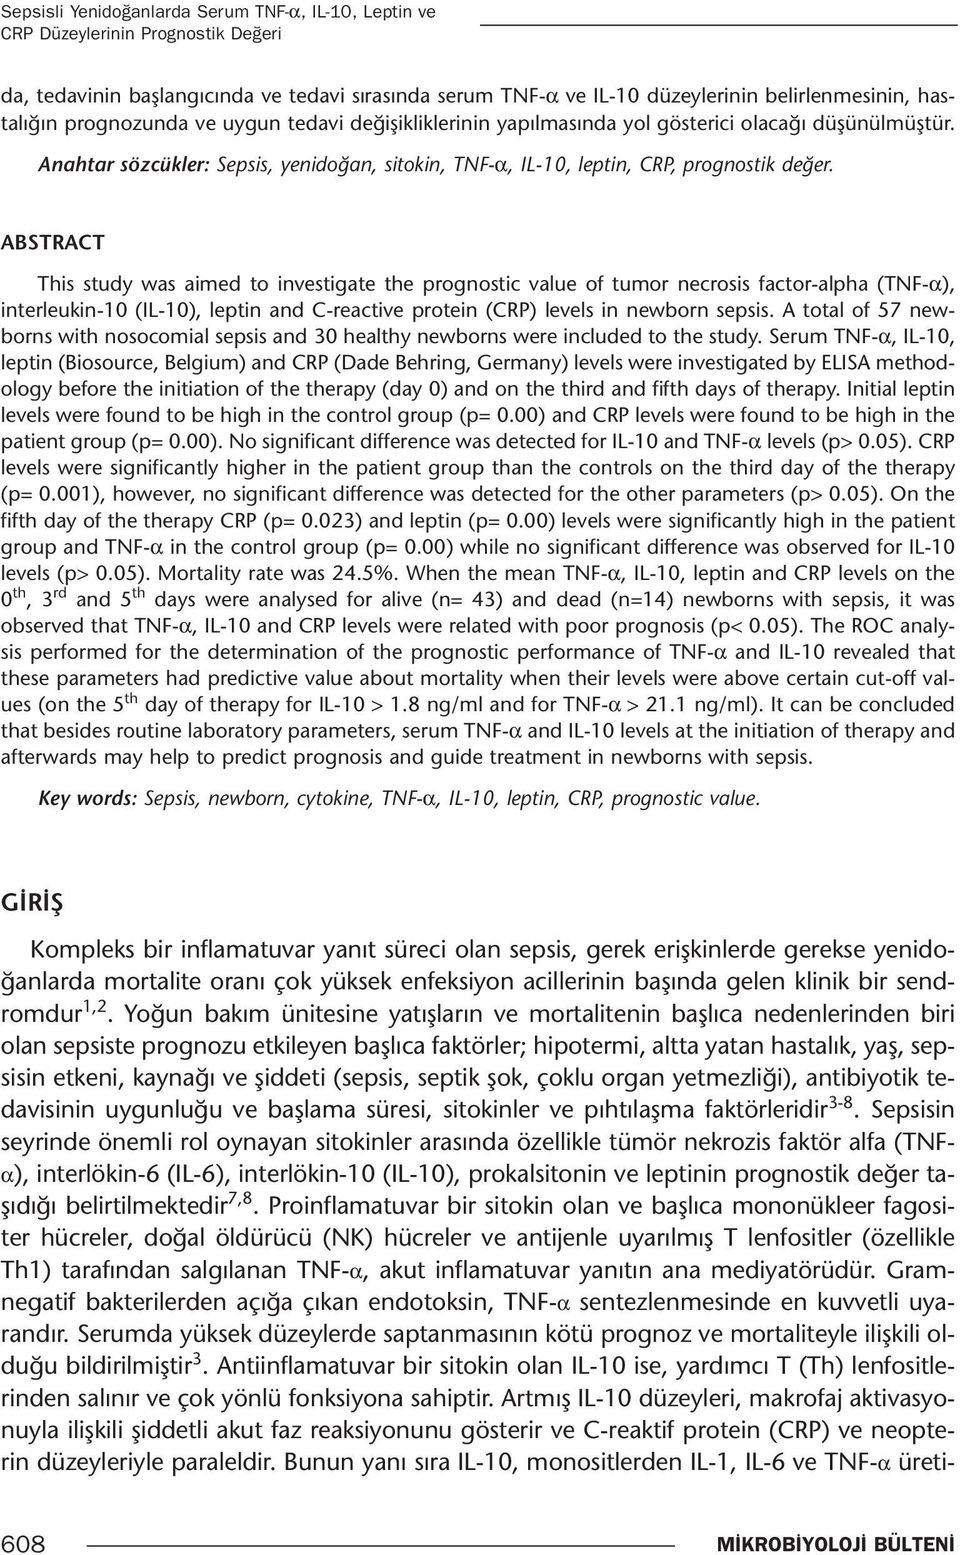 ABSTRACT This study was aimed to investigate the prognostic value of tumor necrosis factor-alpha (TNF-α), interleukin-10 (IL-10), leptin and C-reactive protein (CRP) levels in newborn sepsis.